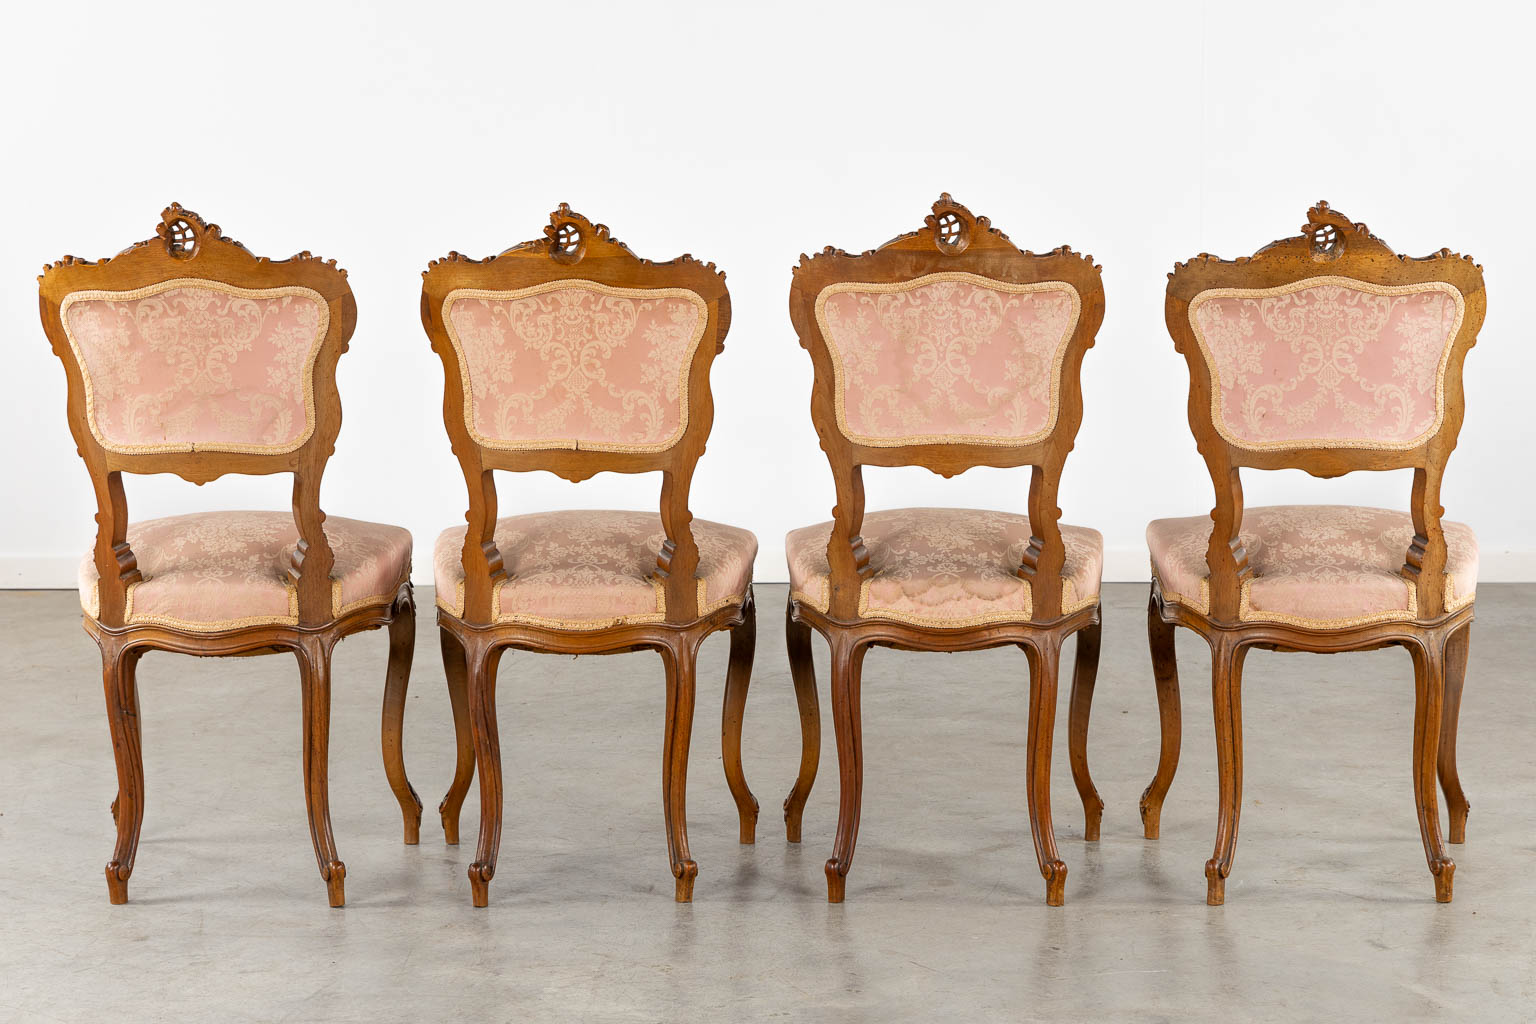 An 8-piece salon suite, sculptured wood in Louis XV style. Circa 1900. (L:67 x W:135 x H:103 cm) - Image 14 of 33